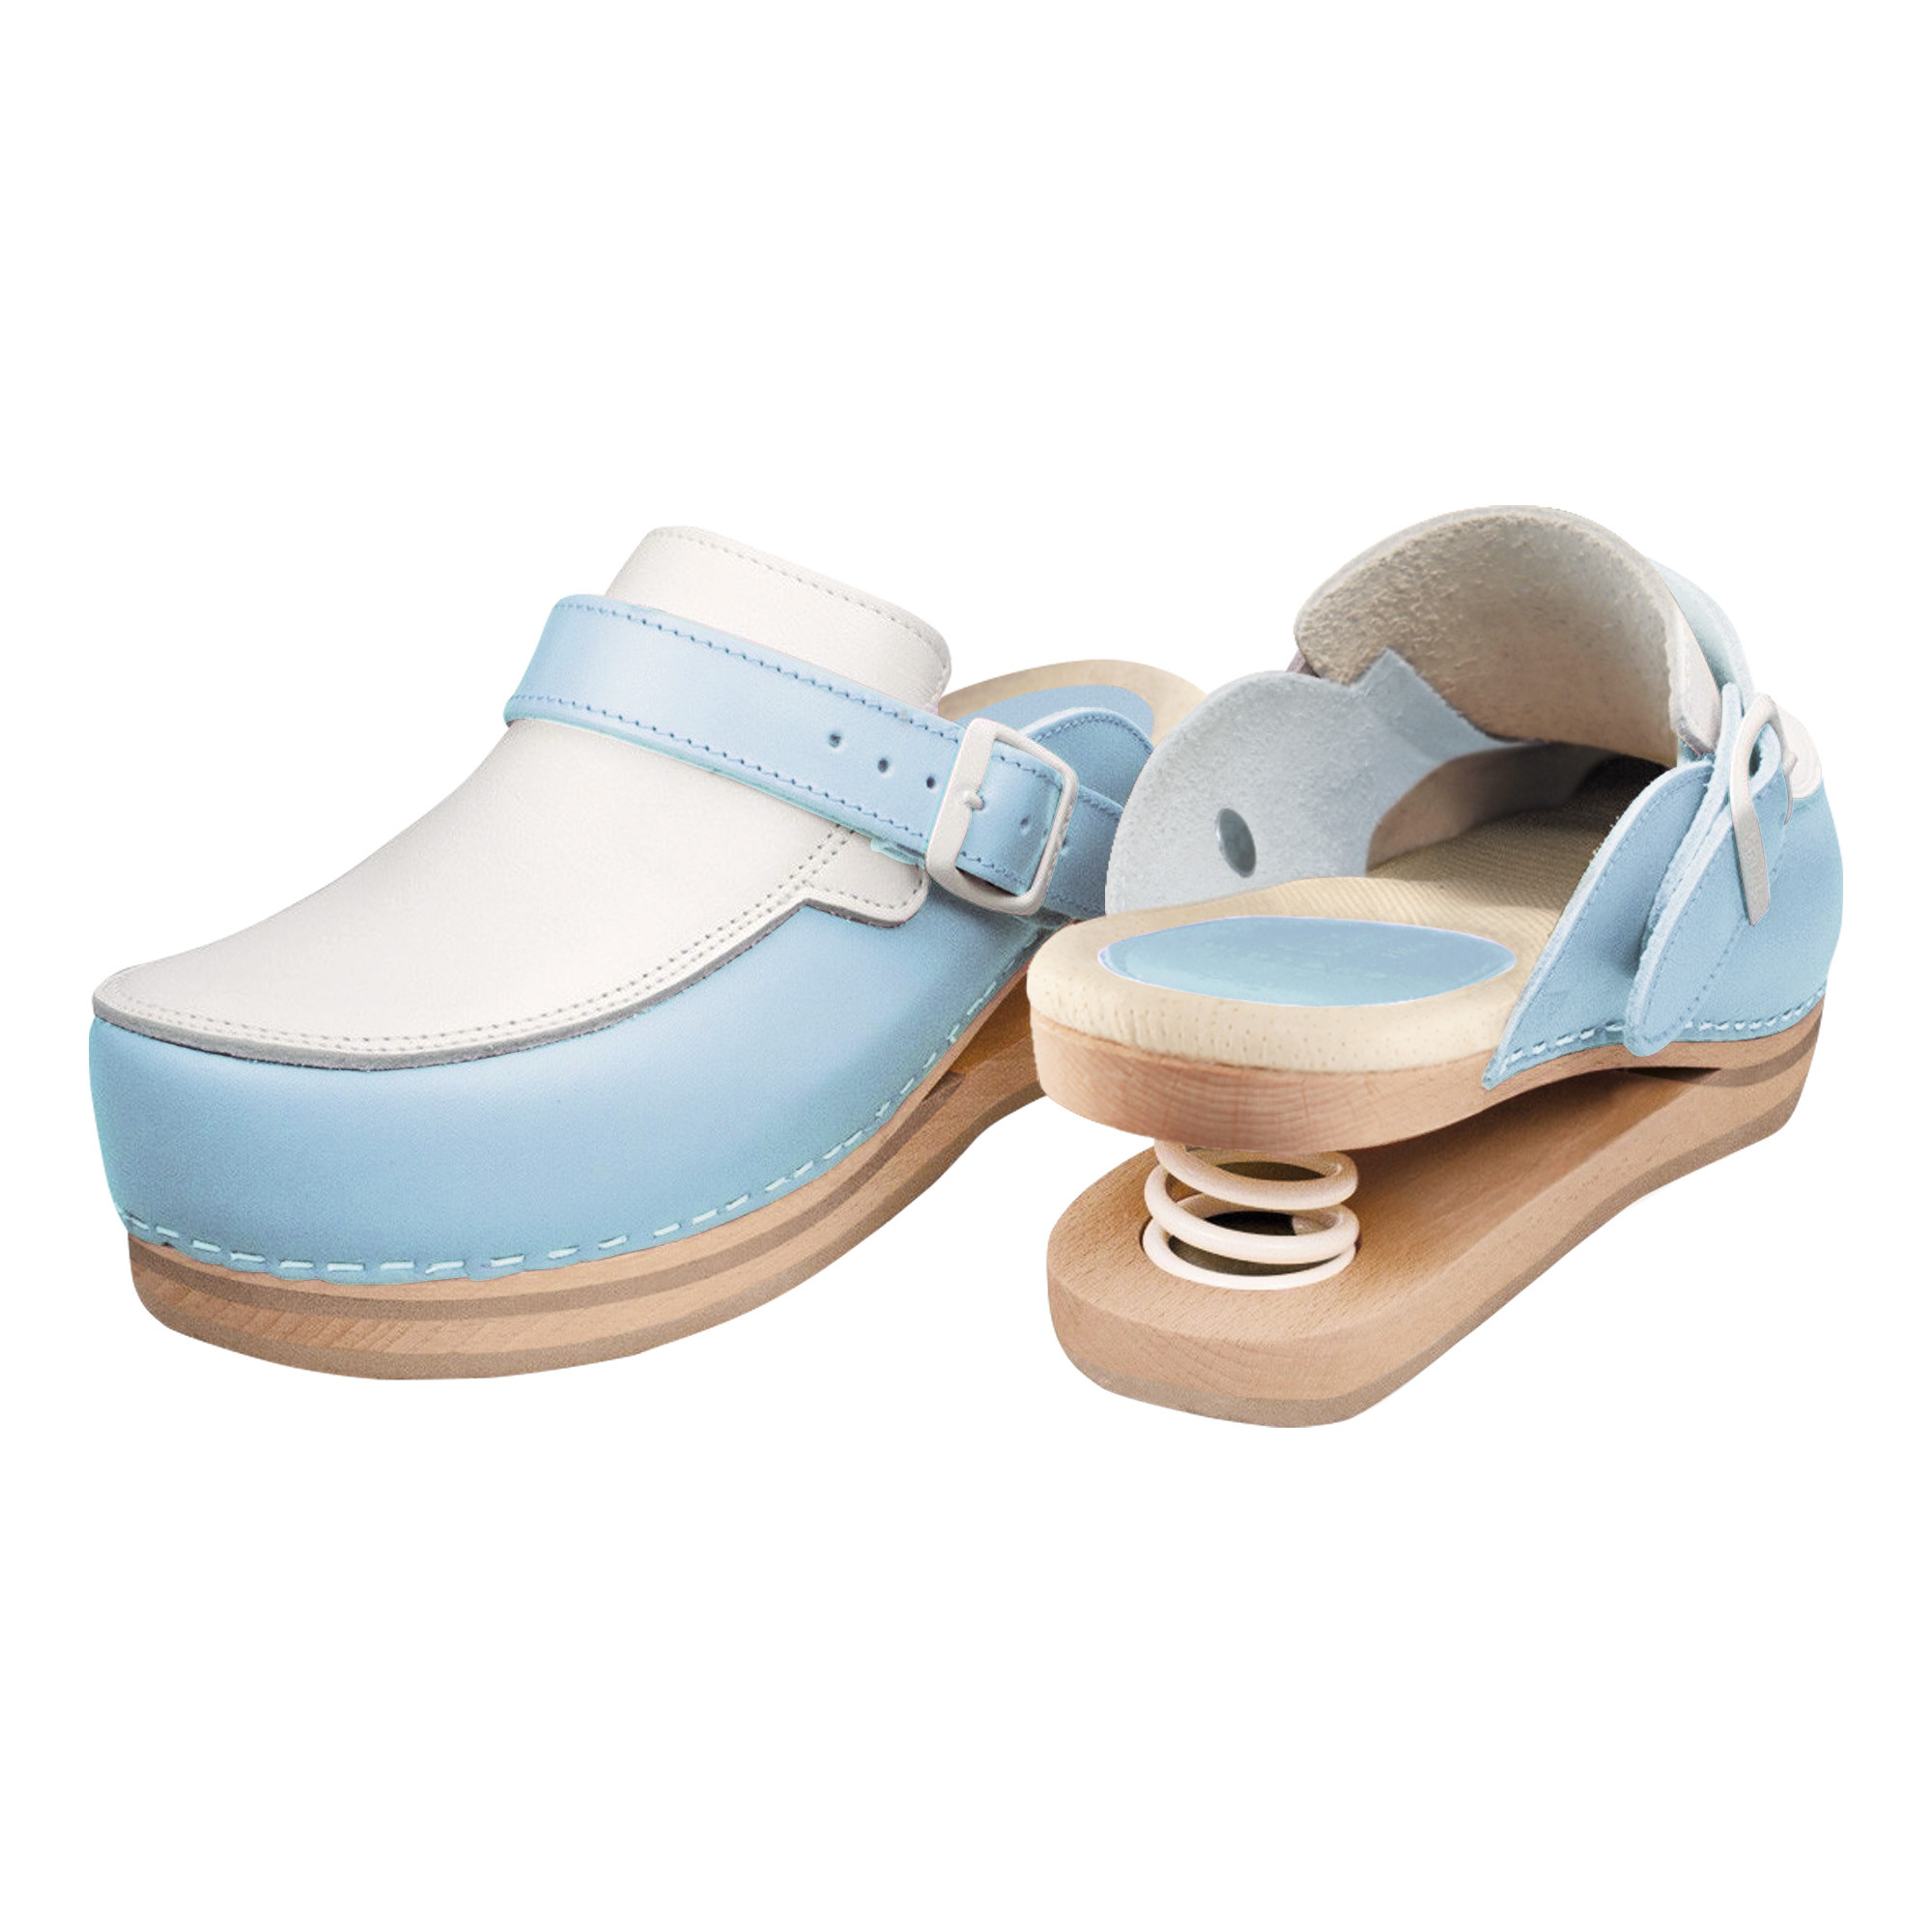 Relax clogs closed with blue spring Size 41